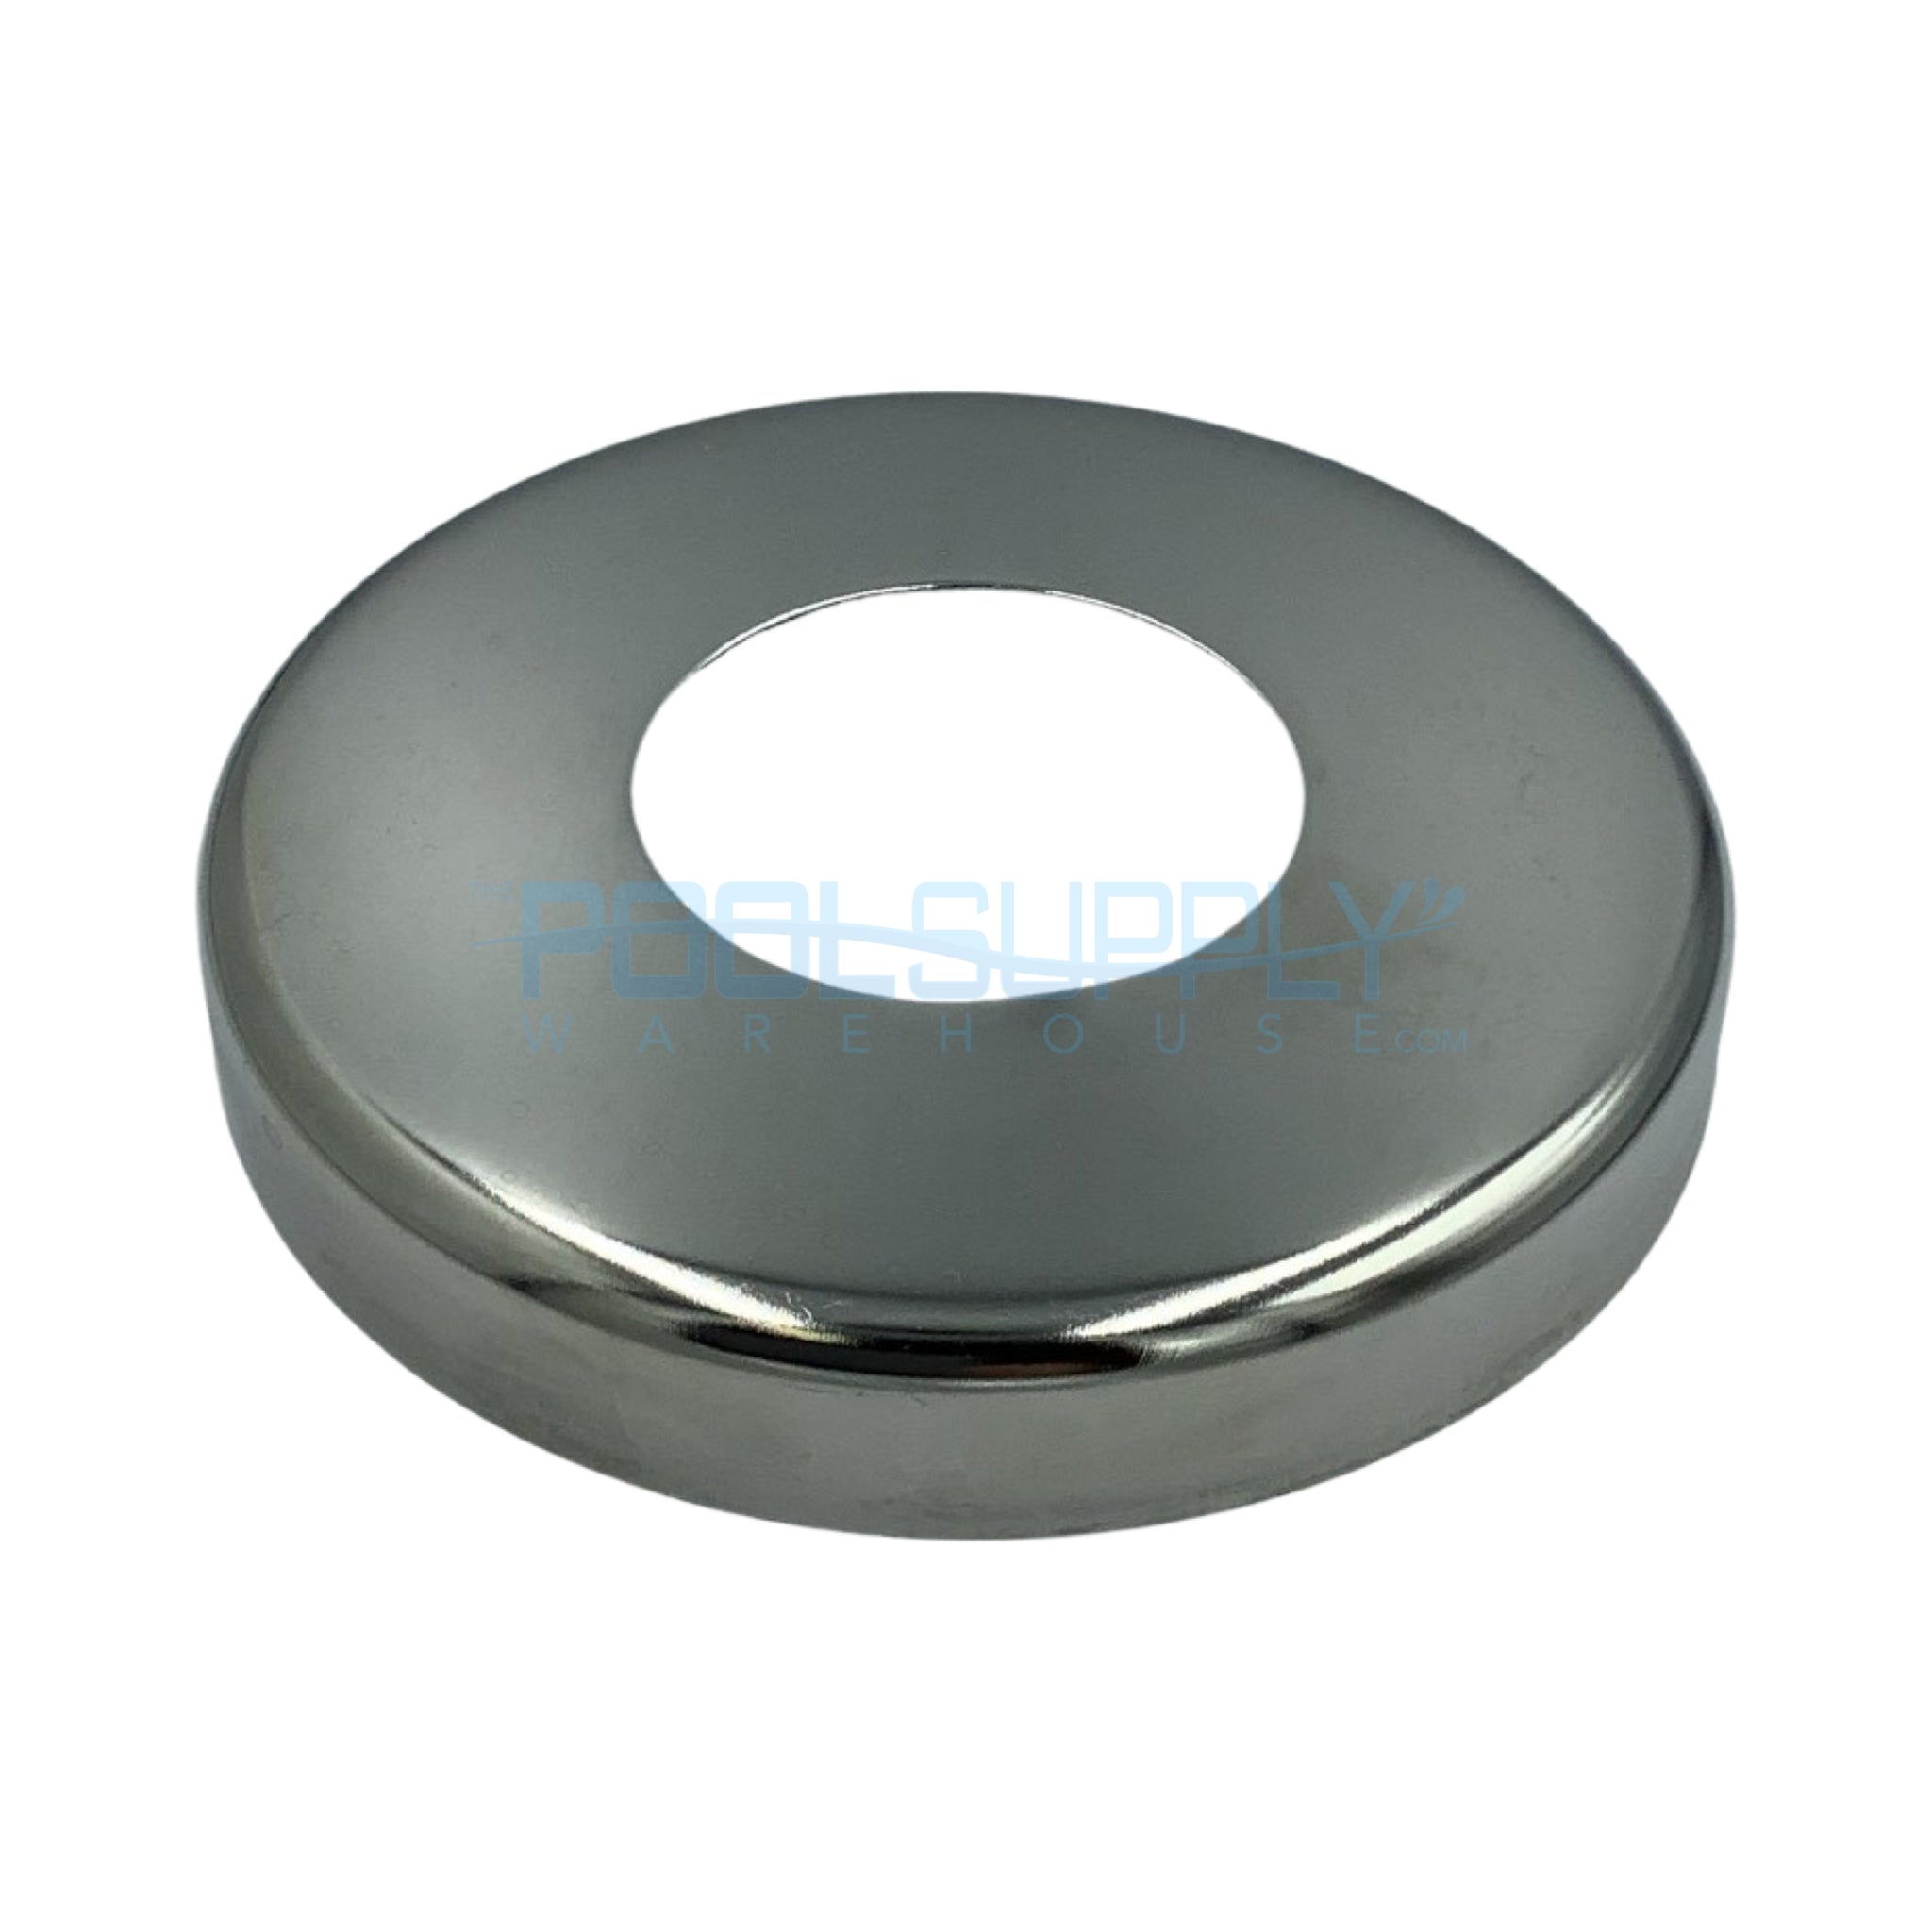 SR Smith Round Escutcheon For Rails with 1.9" OD Tubing - EP-100F-MG - The Pool Supply Warehouse